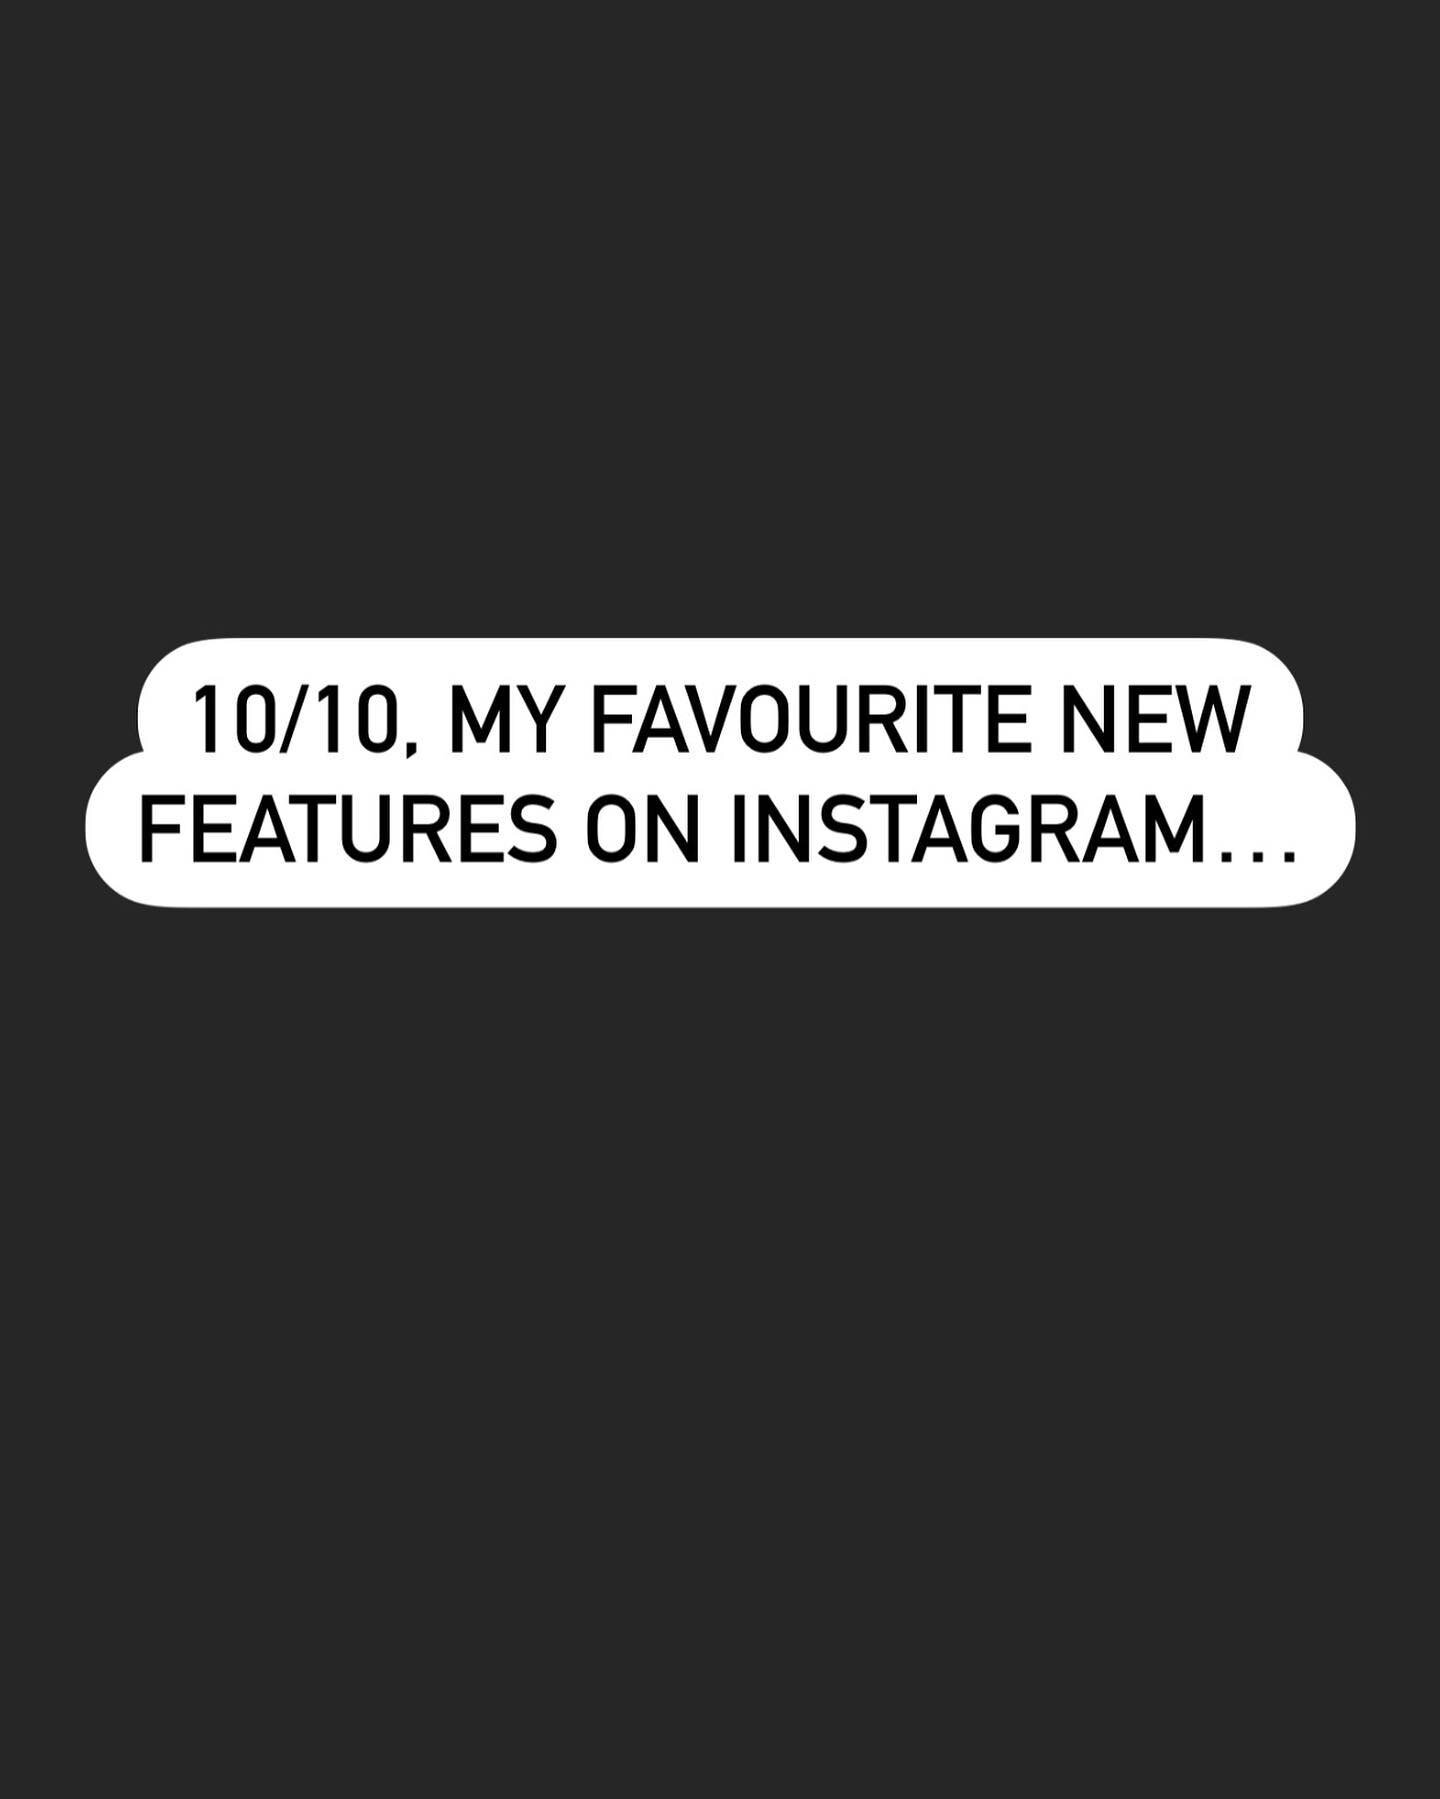 10/10, my new favourite features on Instagram: hiding like and view counts on my posts and other people&rsquo;s. Yes 🙌🏾 What do you think of these new features, good ancestors?